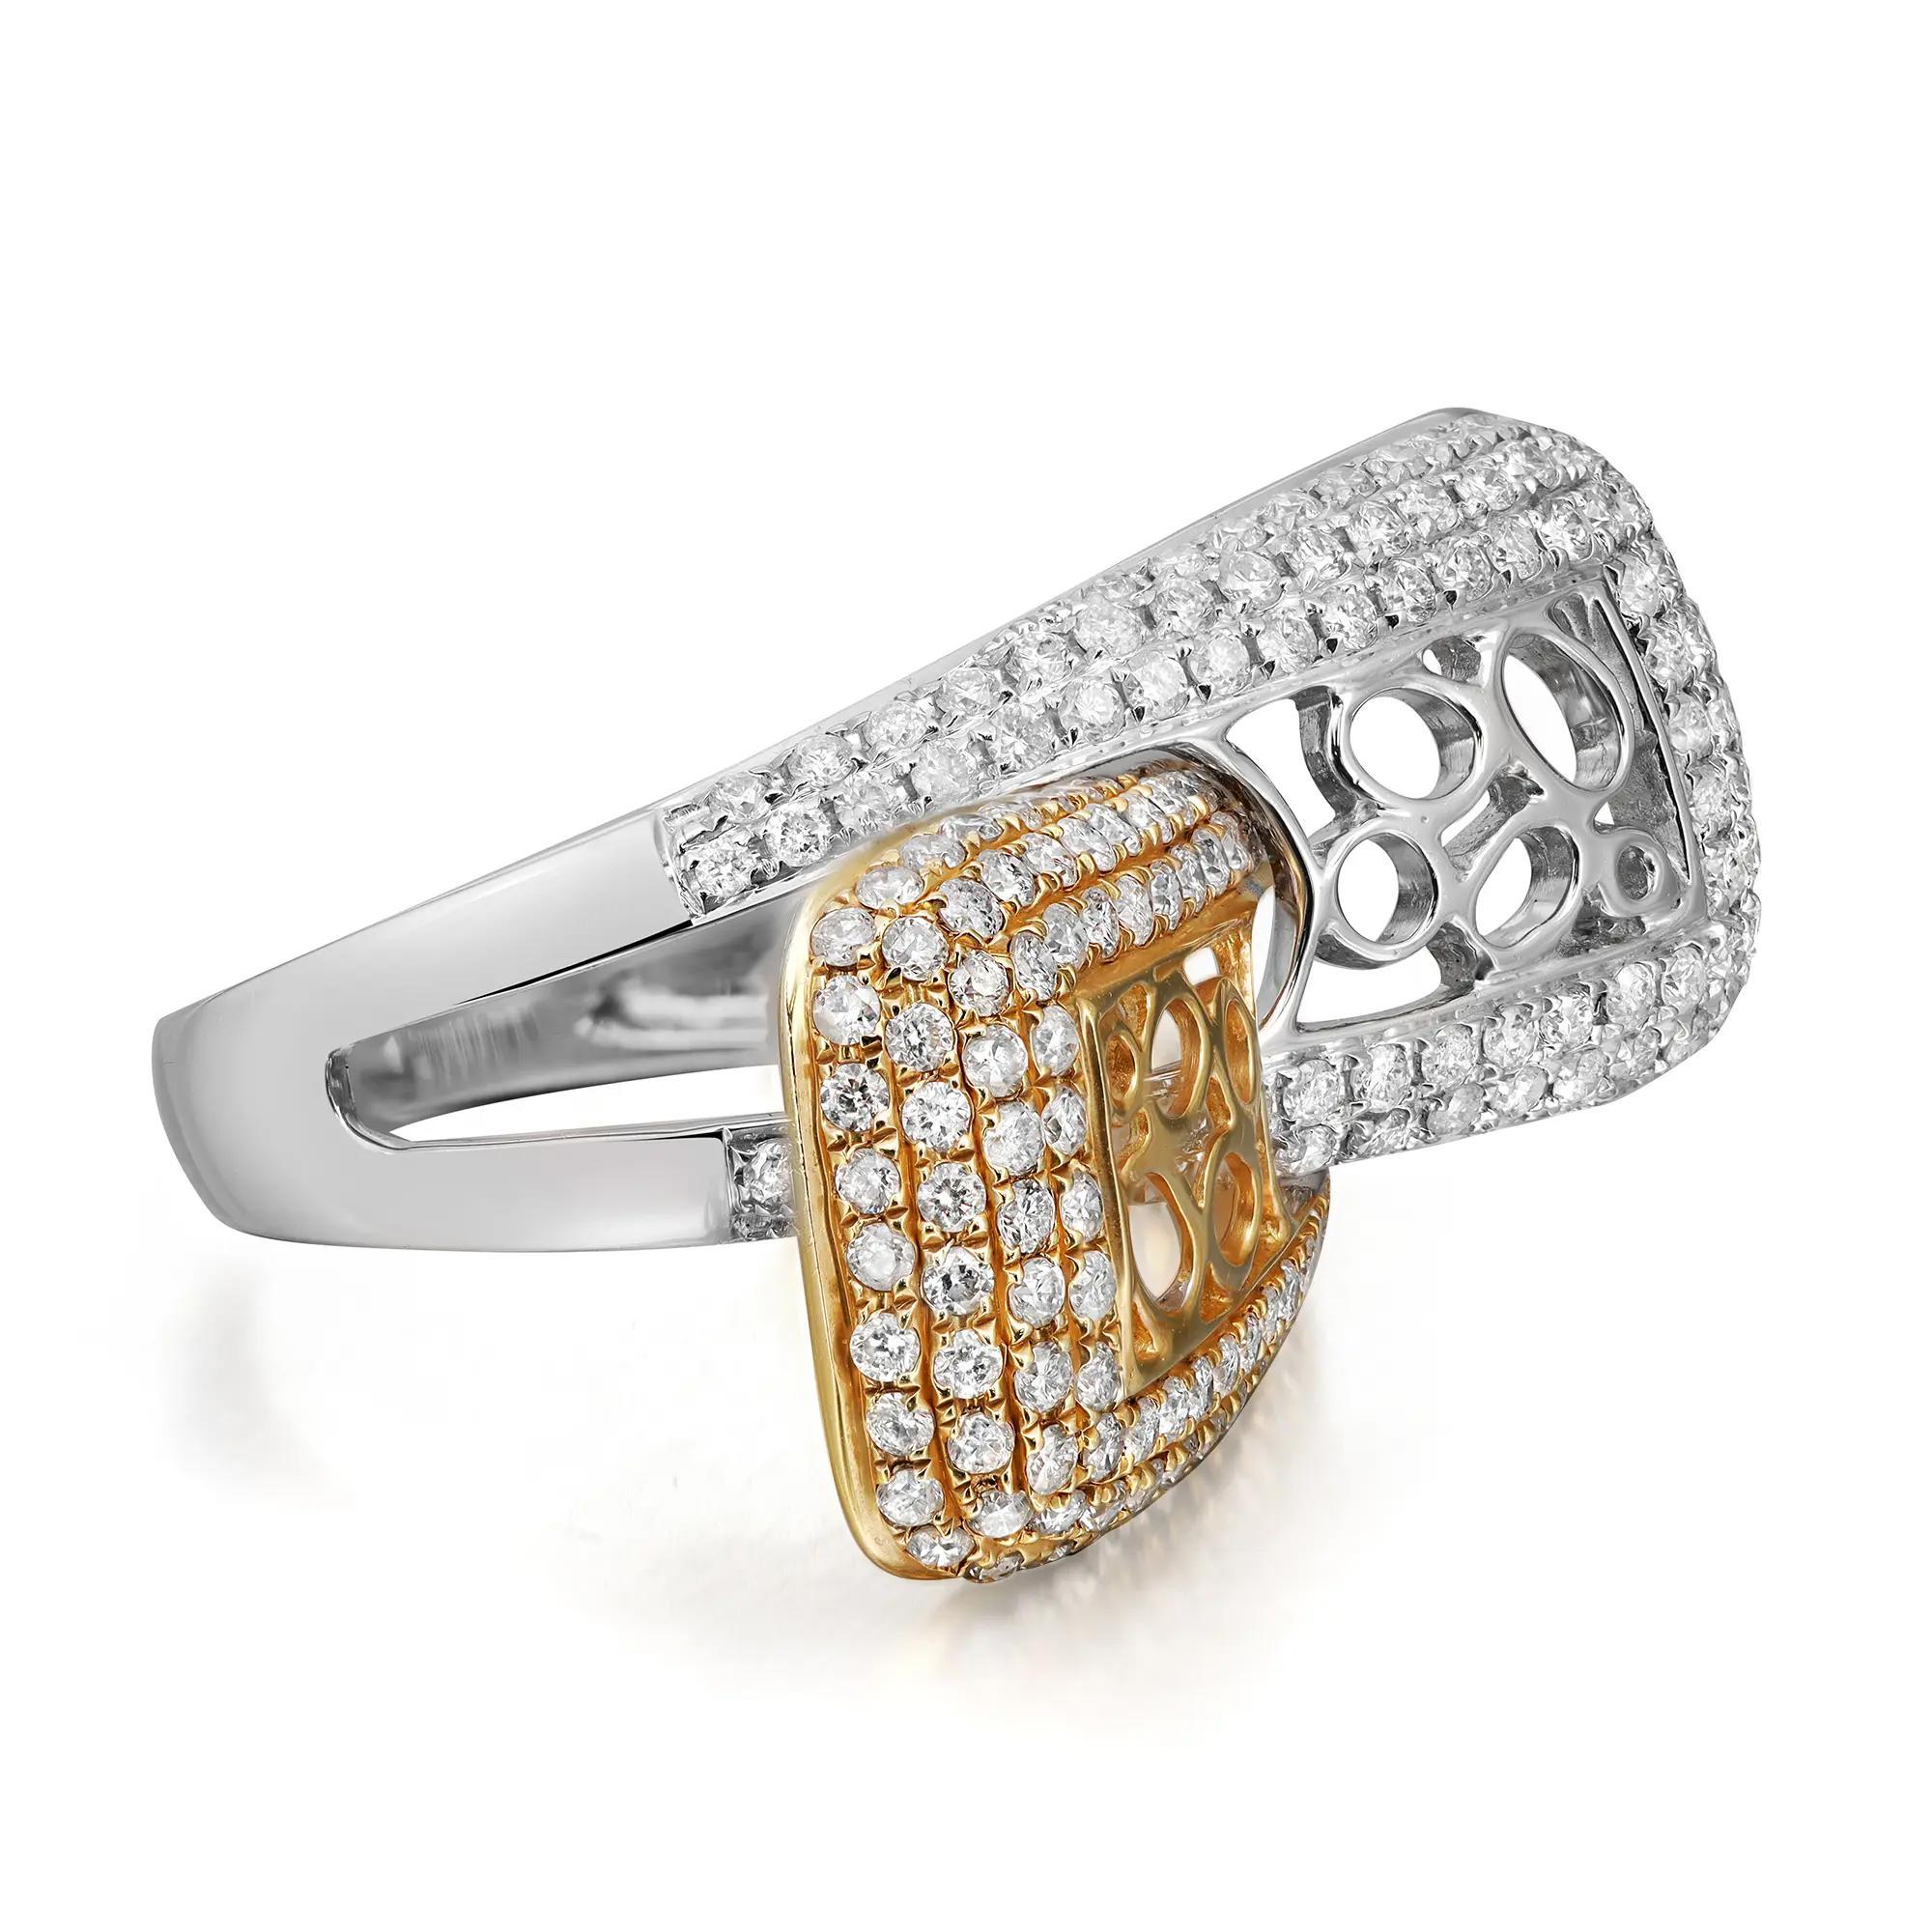 Dazzle away with this bold ladies cocktail ring. Crafted in 14k yellow and white gold. Showcasing pave set round brilliant cut diamonds weighing 1.85 carats with round intricate detailing design. Diamond quality: I color and SI1 clarity. Ring size: